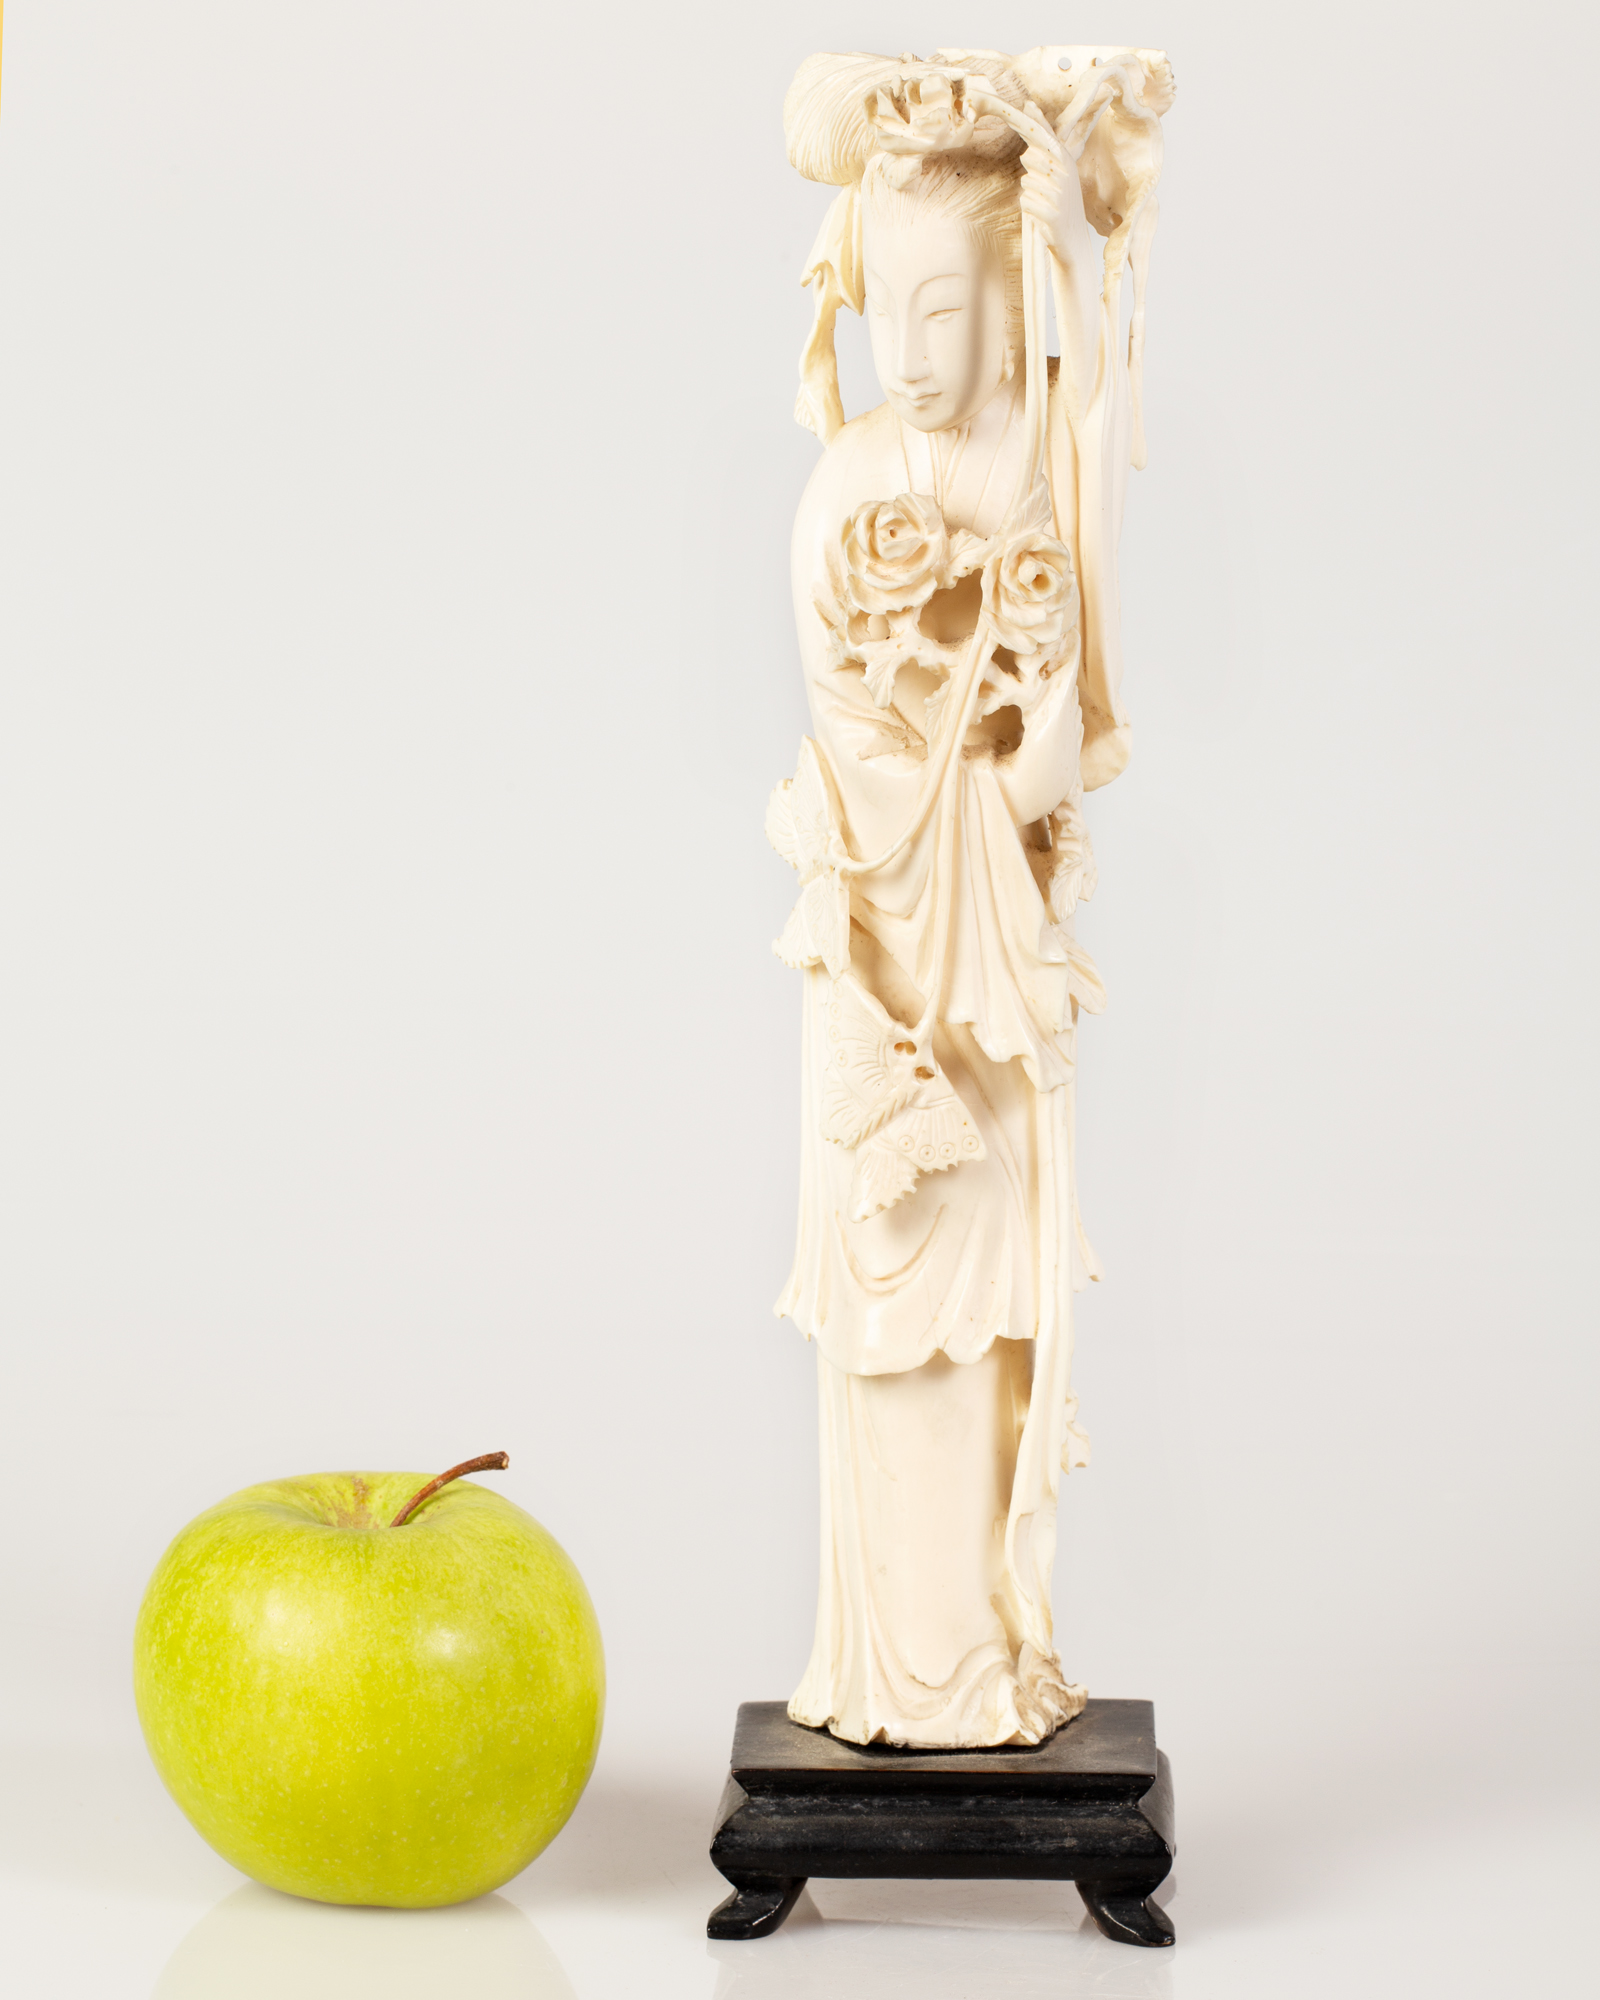 Chinese Bone Sculpture Girl Holding a Flowering Bouquet & High Wand in Her Hand - Image 2 of 3